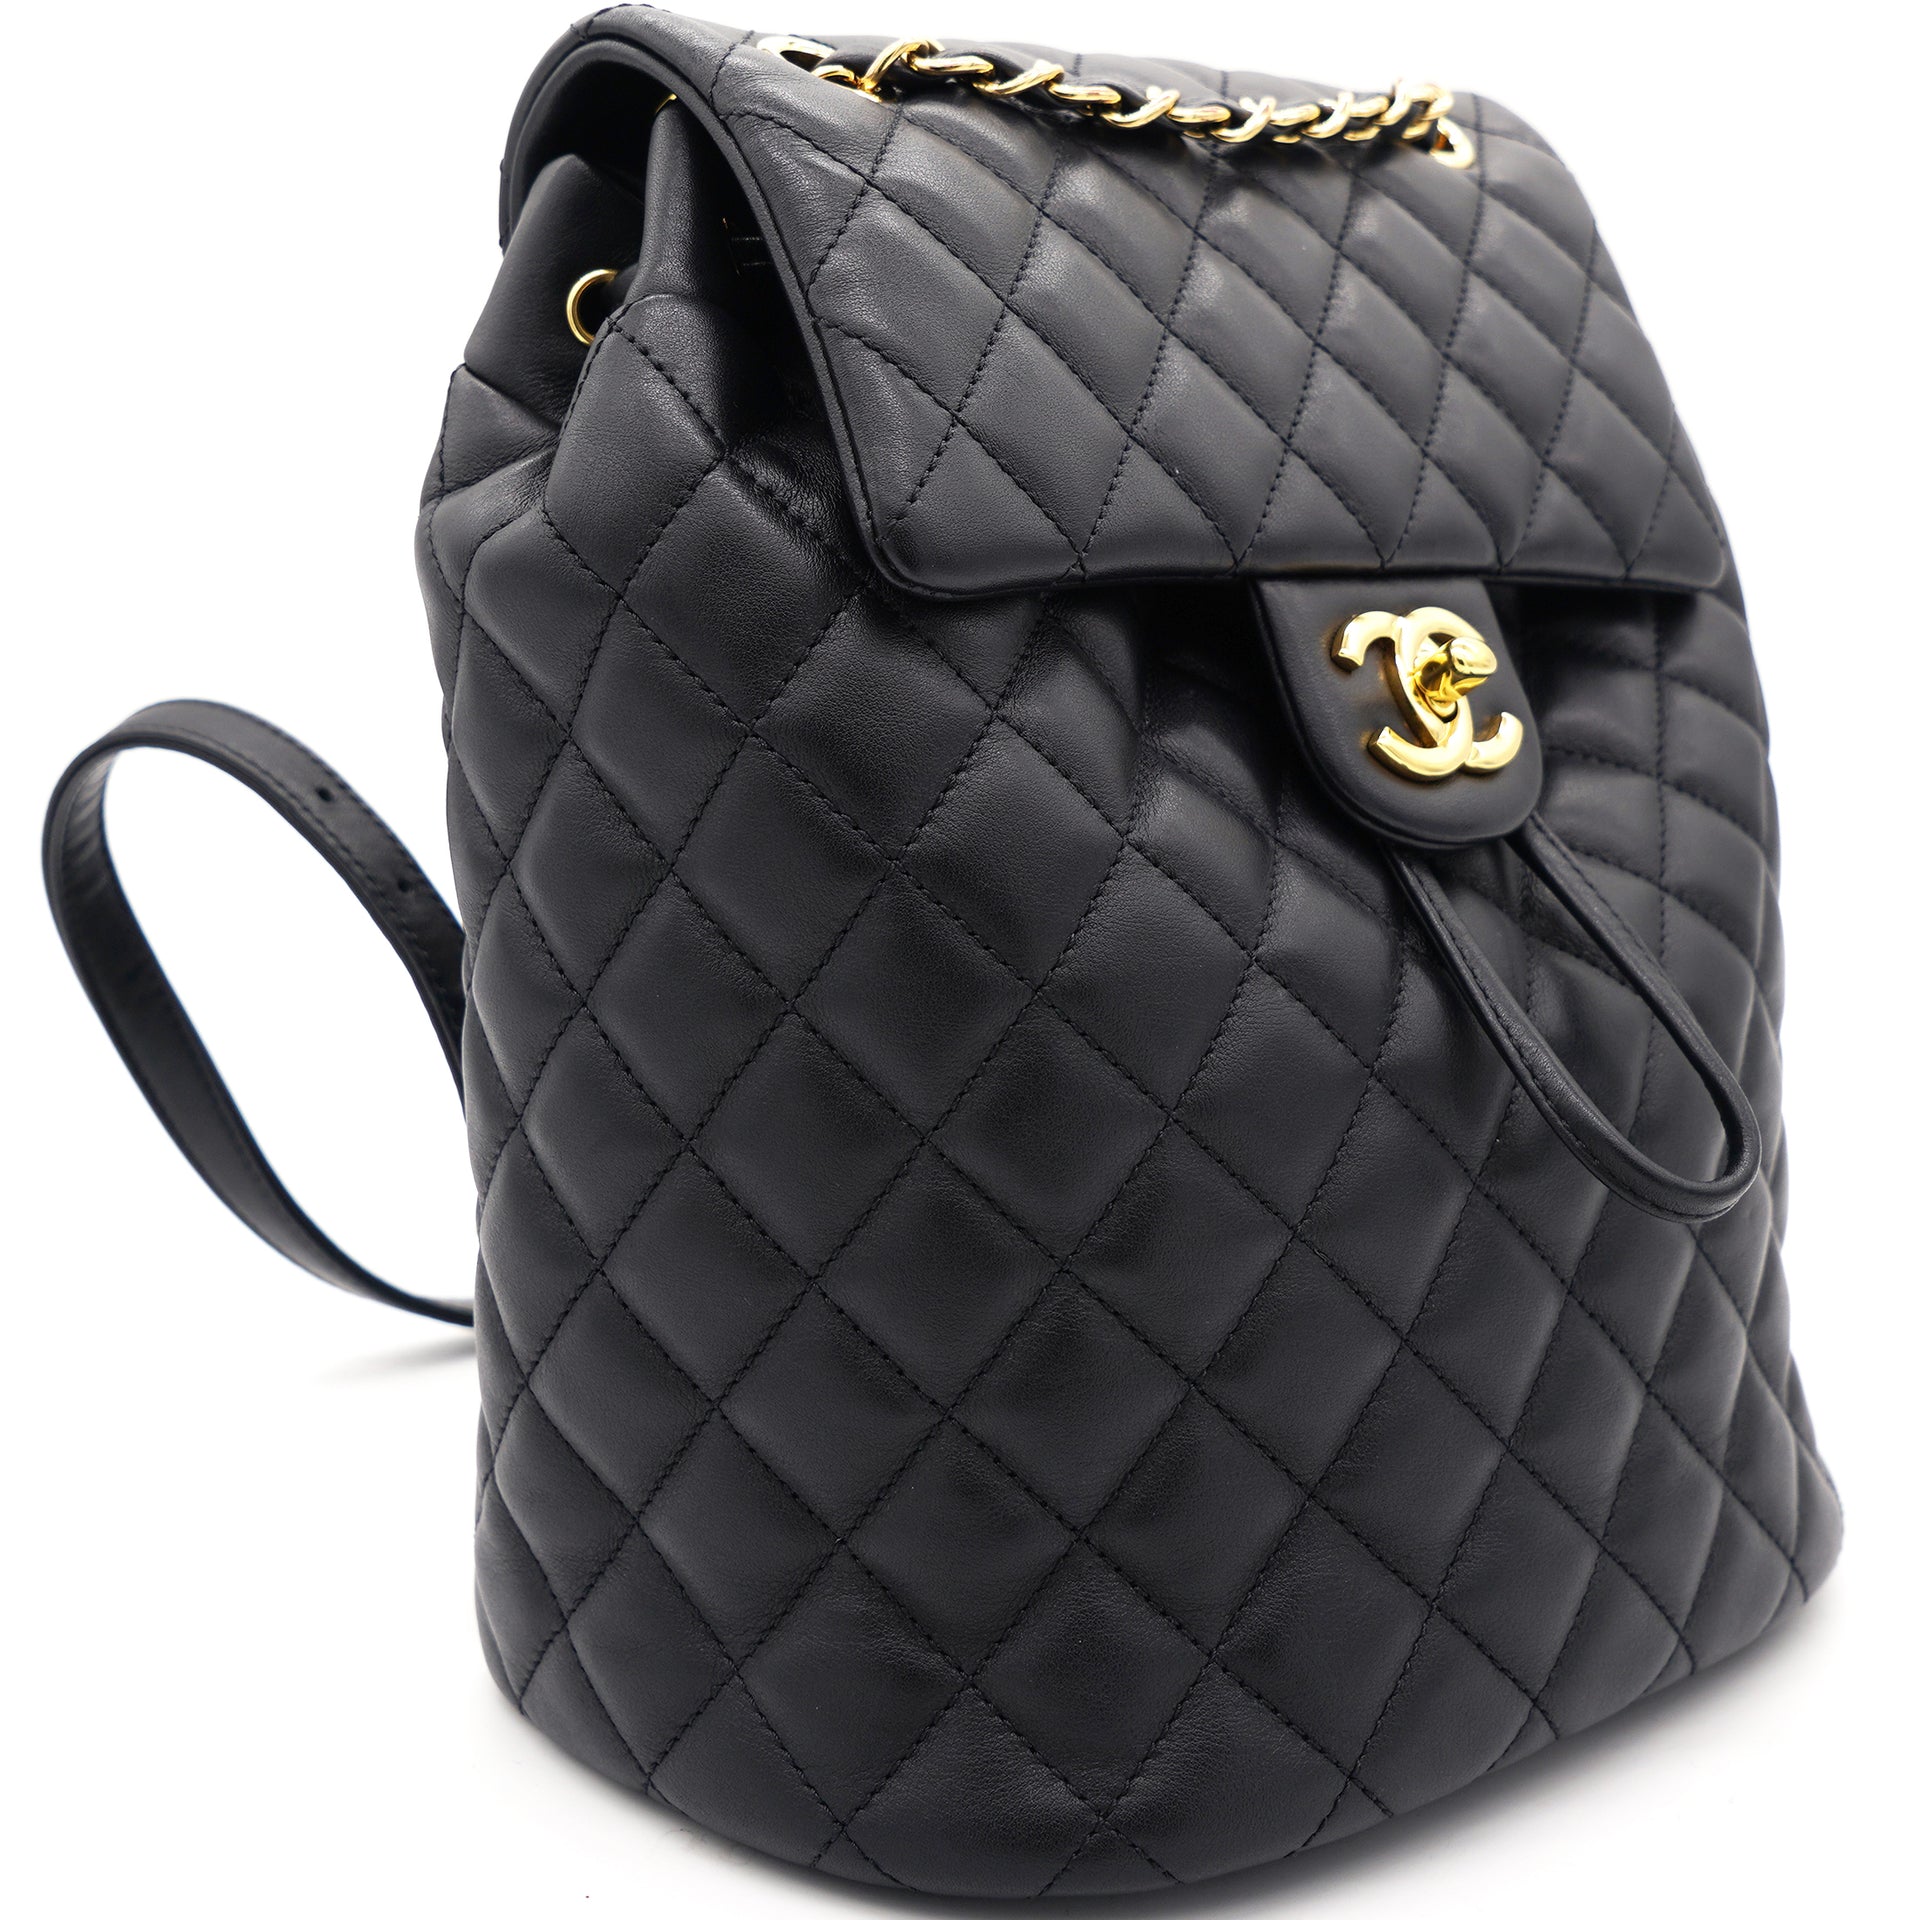 Authentic Chanel Urban Spirit Backpack Quilted Lambskin Black Gold Hardware